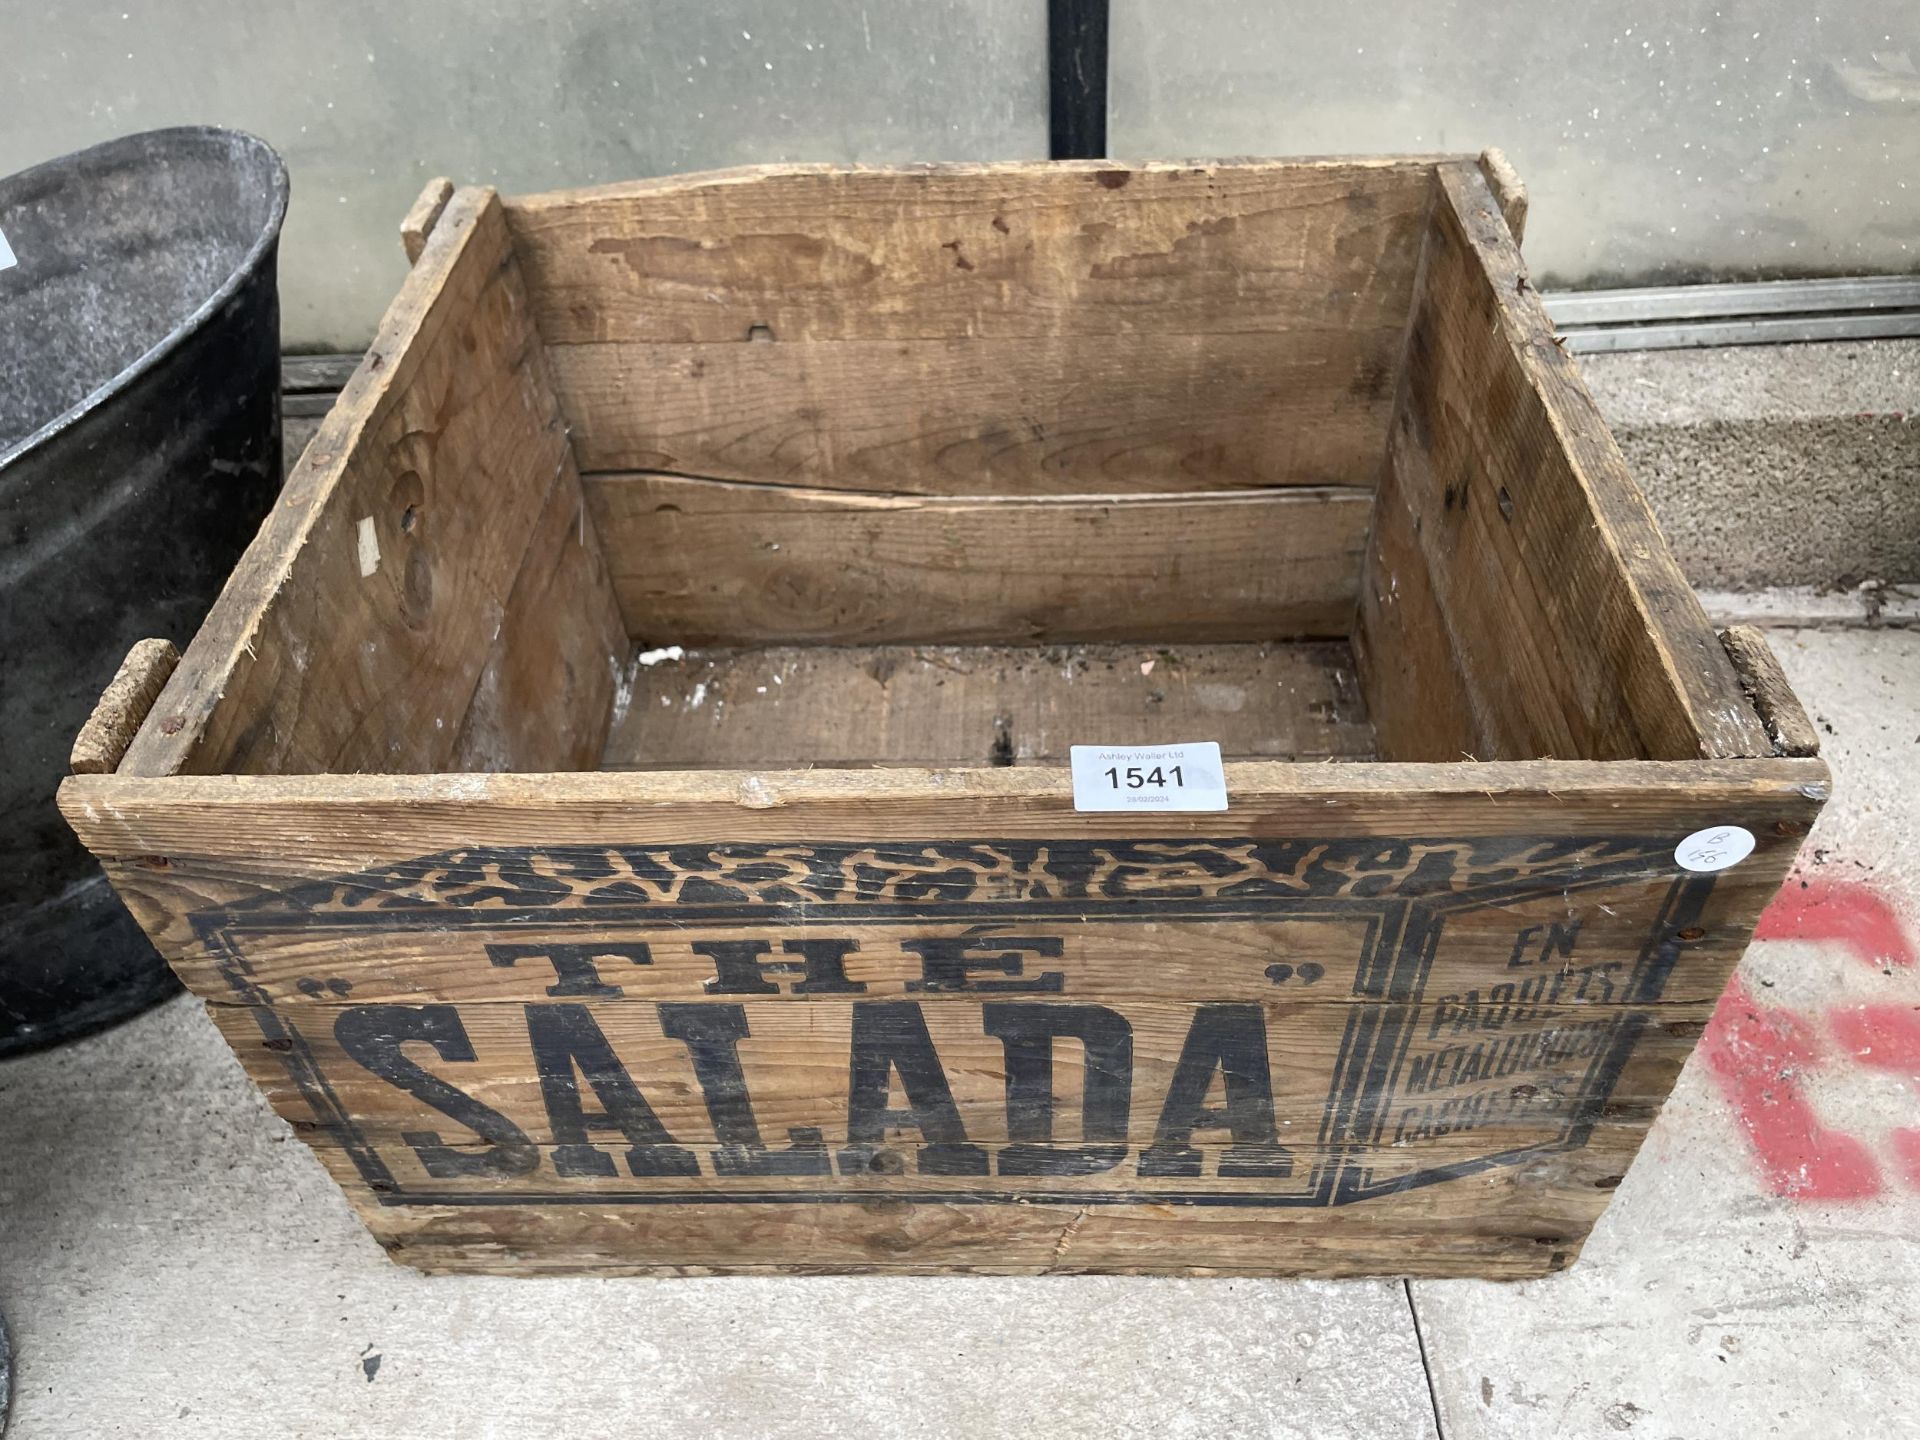 A VINTAGE WOODEN MONOGRAMED 'THE SALADA' CRATE